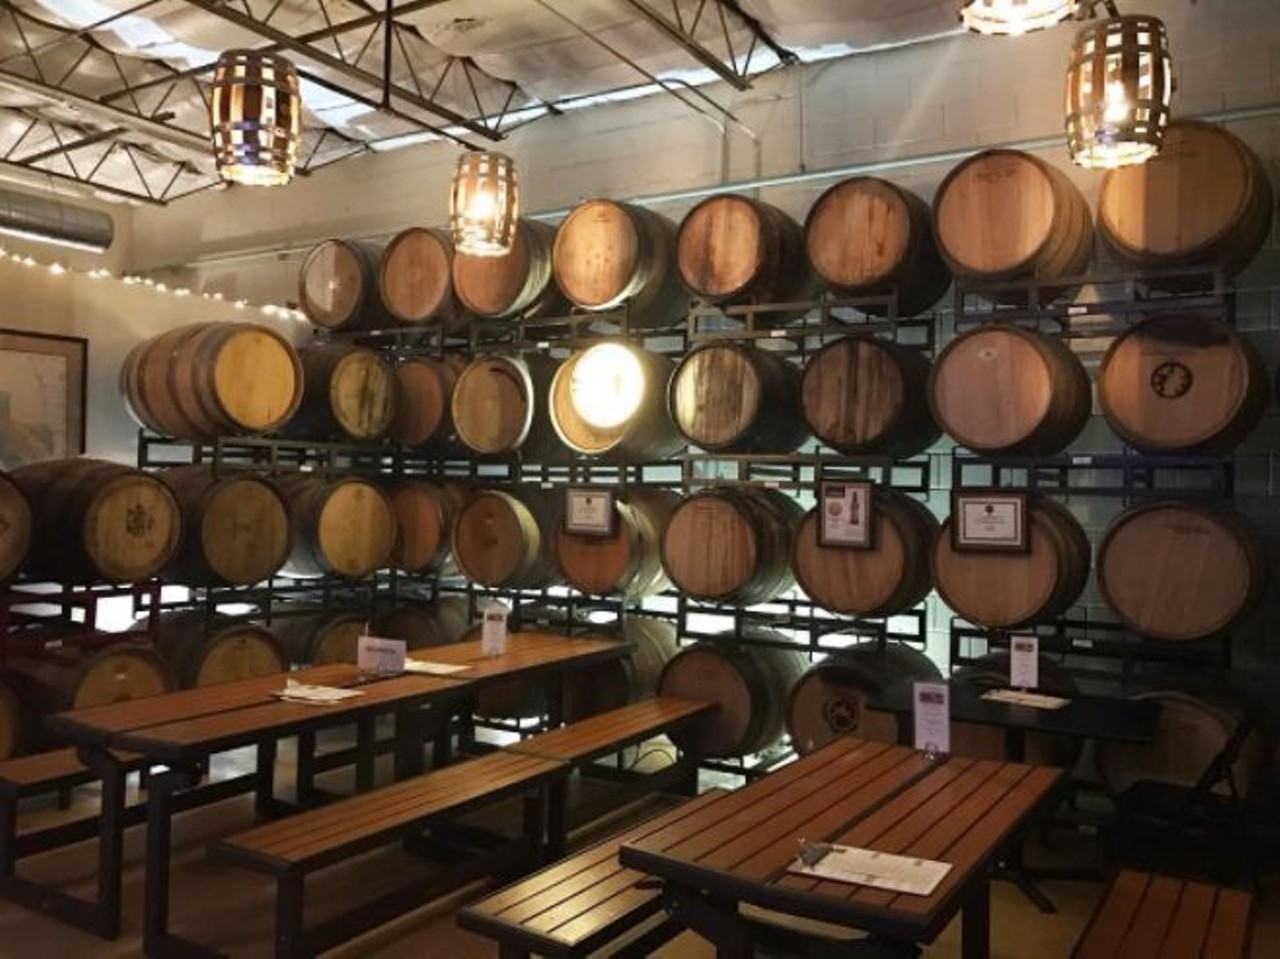 Ranger Creek Brewing & Distilling
48934 Whirlwhind Drive, (210) 775-2099, drinkrangercreek.com
Tiny taproom with big flavors, nights at Ranger Creek are spent sampling cocktails that use their award-winning whiskey and beers. 
Photo via Instagram,  jumpcutian